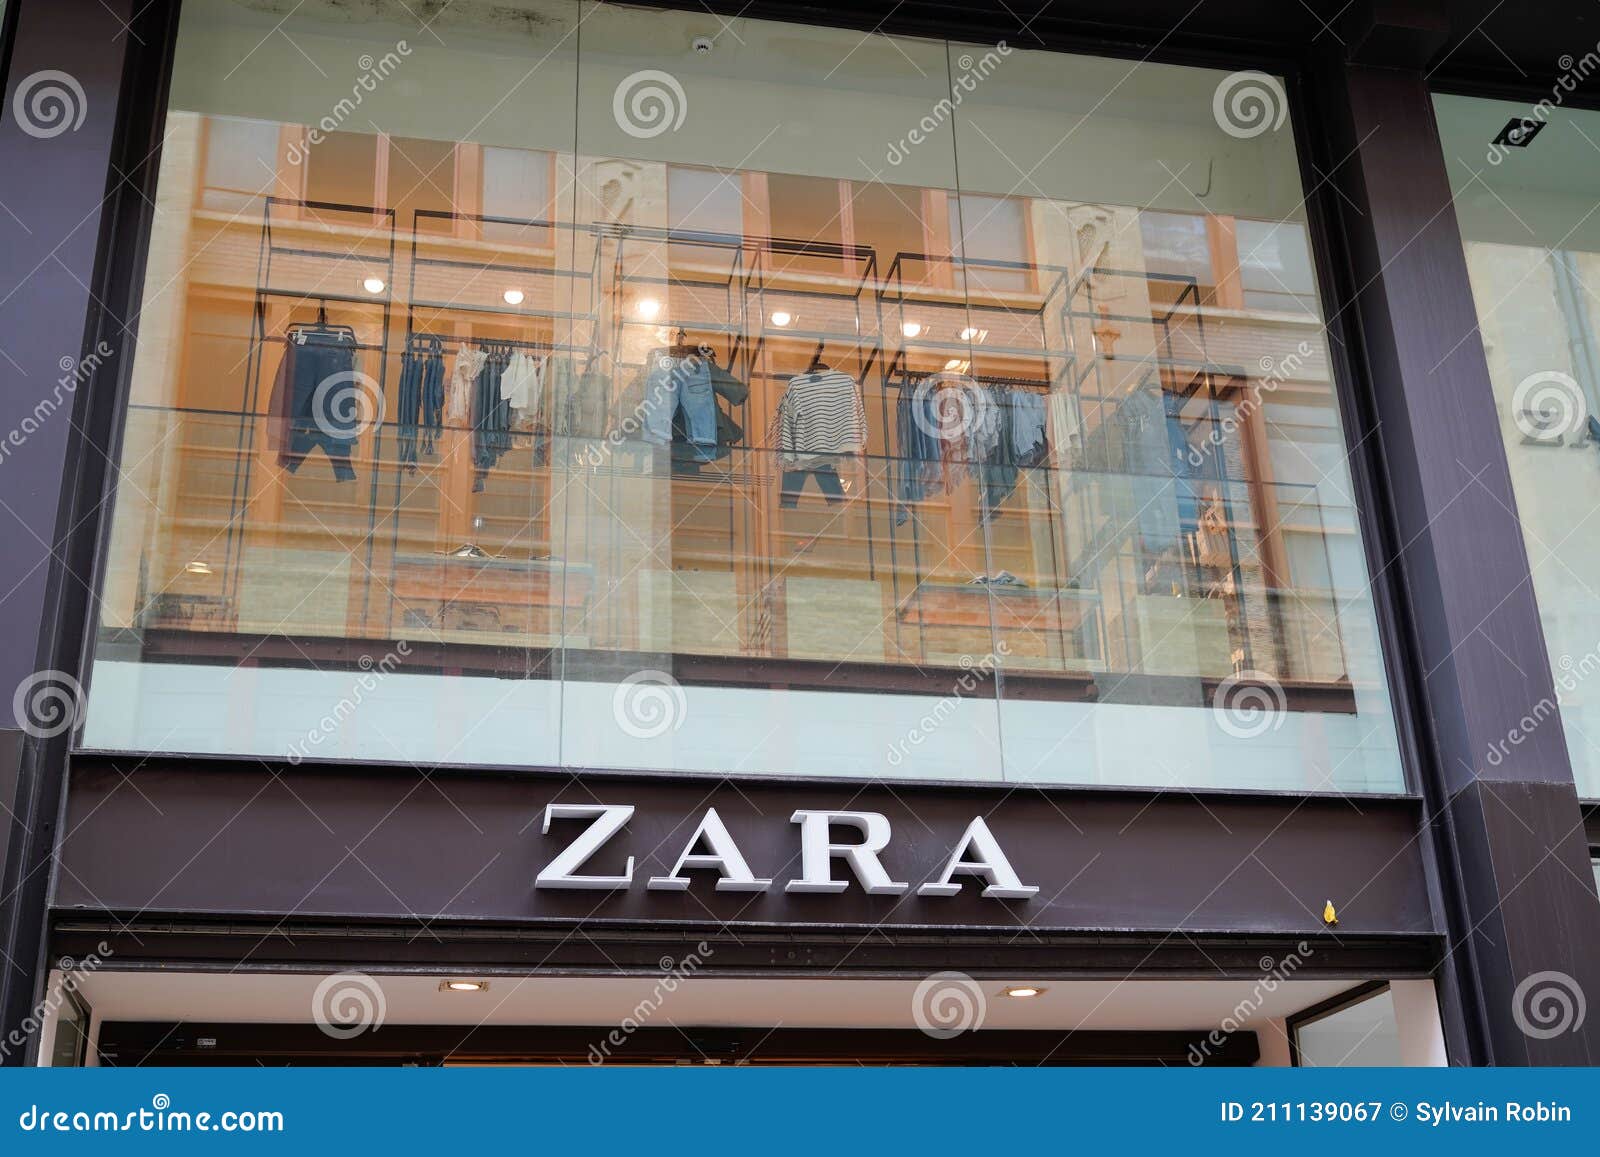 Zara Logo Brand and Text Sign Front of Clothes Store of Fashion ...